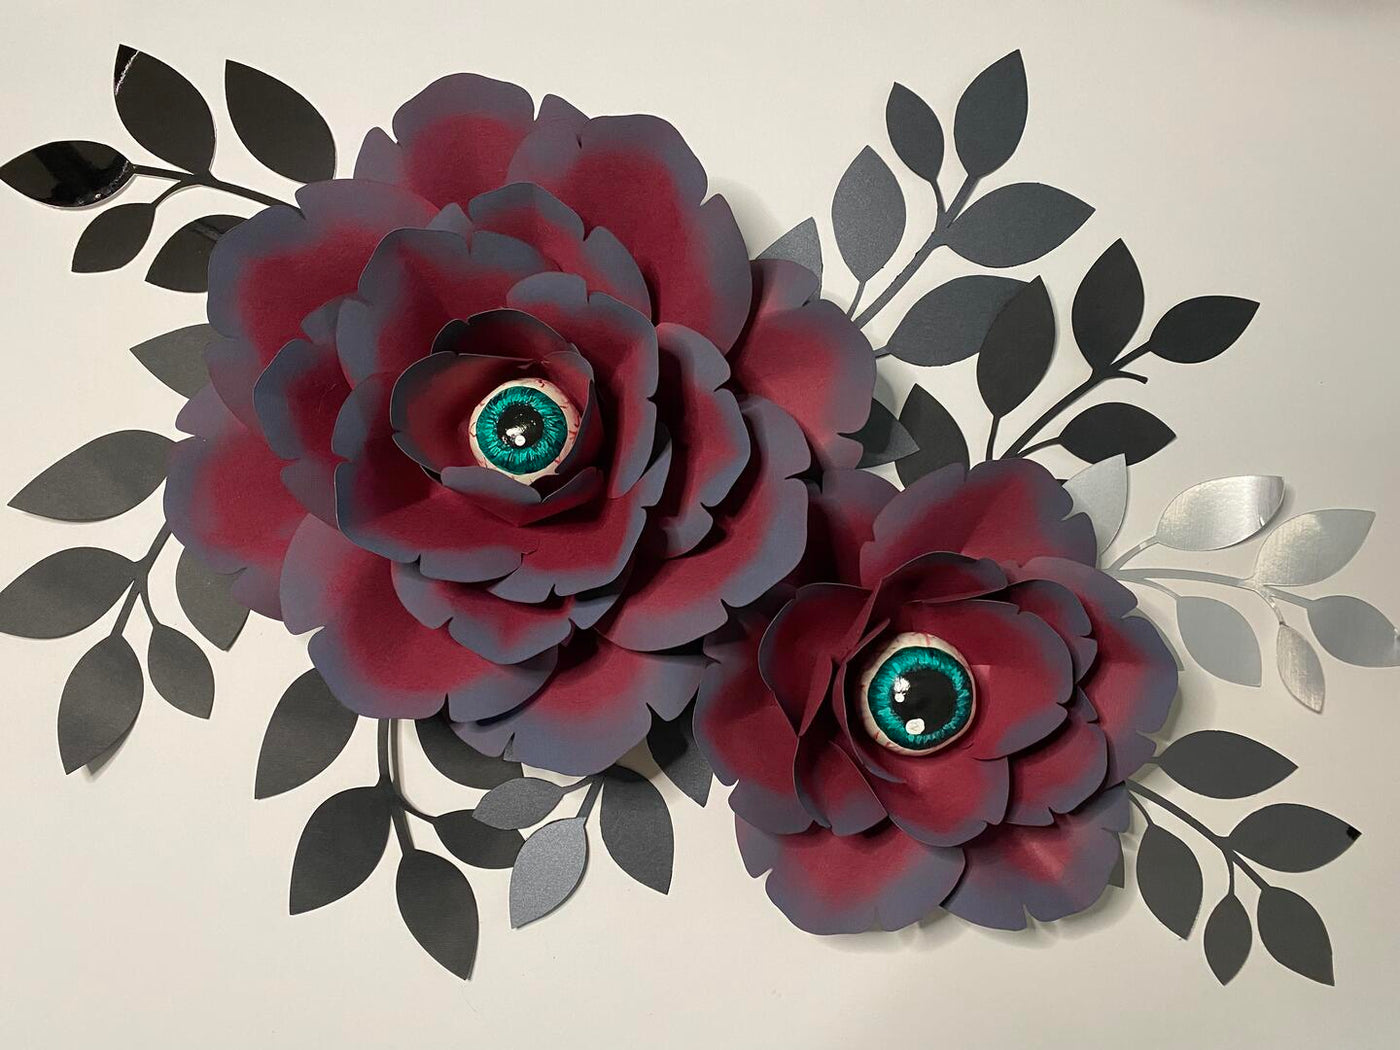 Large Paper Flower Tutorial with a Spooky Twist